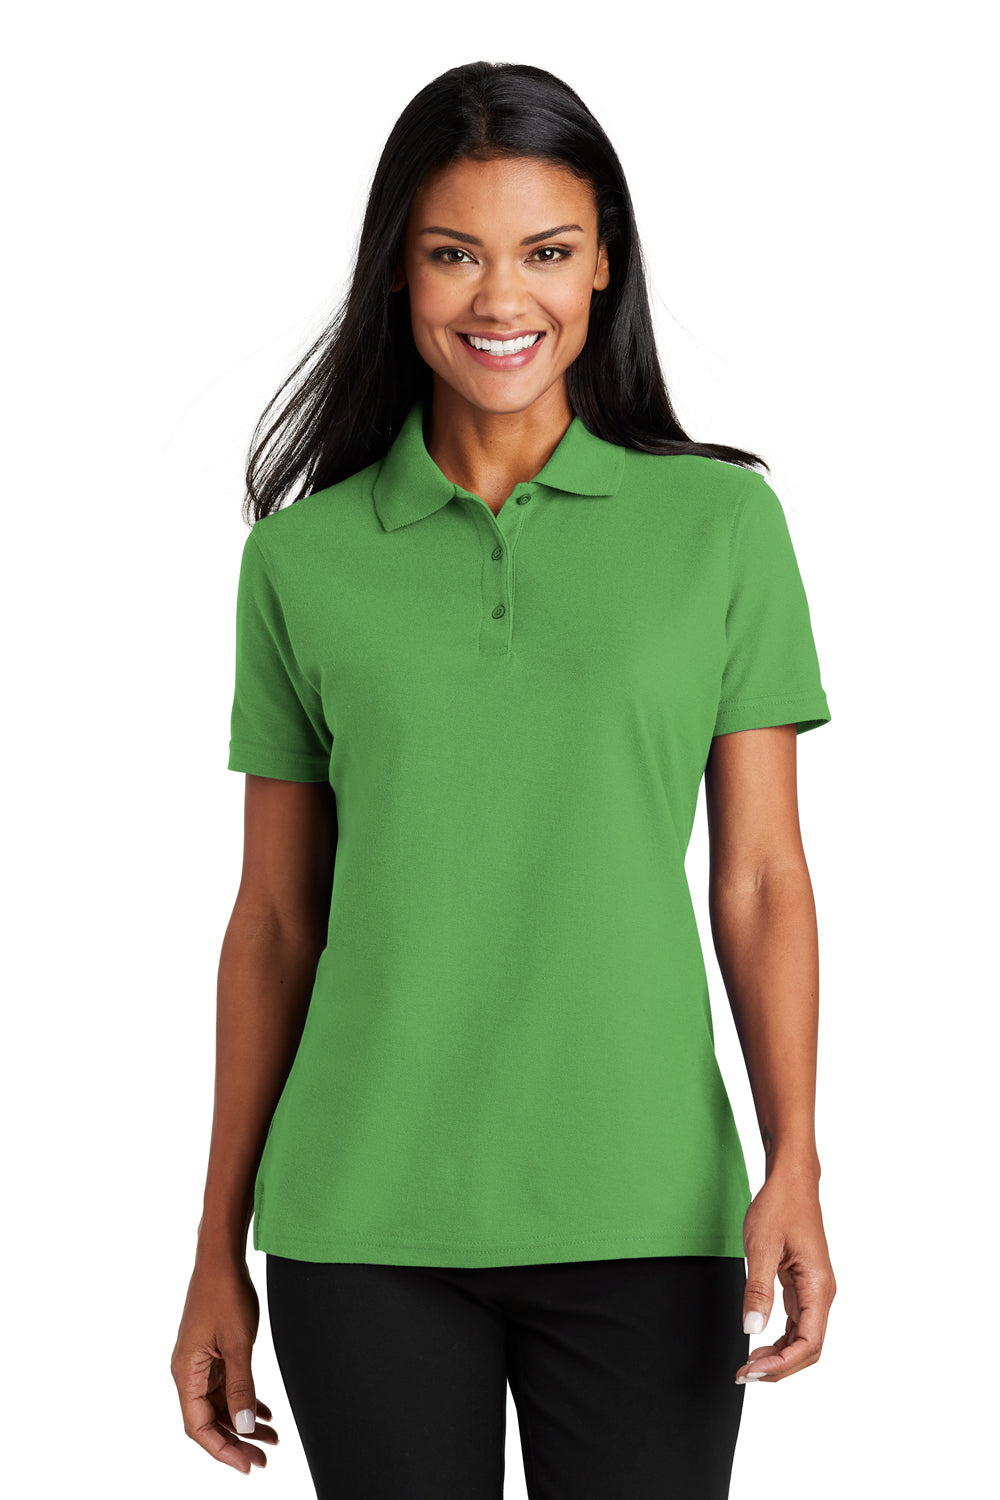 Port Authority L510 Womens Moisture Wicking Short Sleeve Polo Shirt Vine Green Front